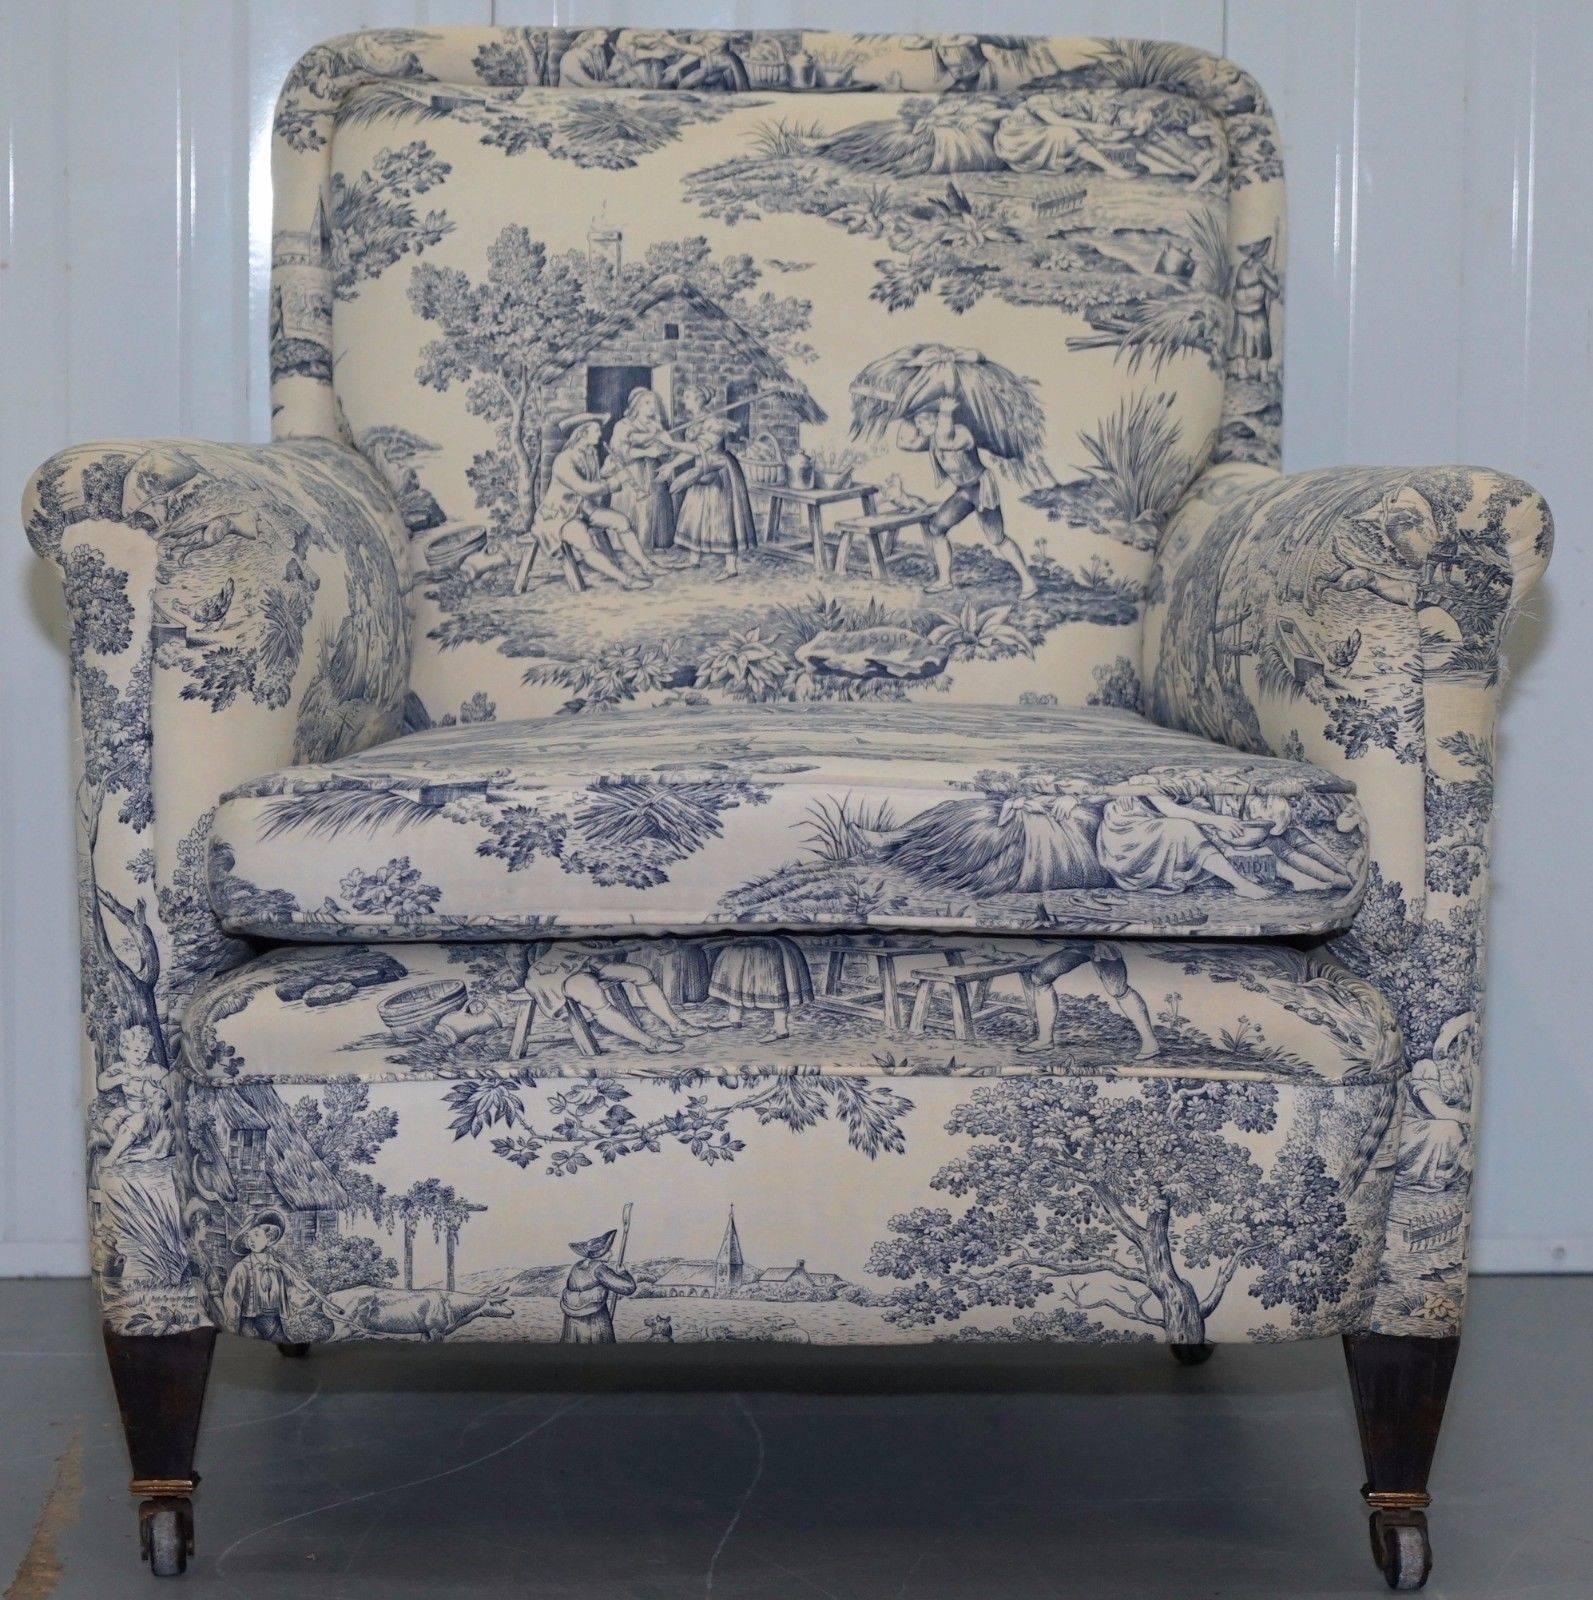 Lovely original WG 1738 stamped French club armchair with early Toile De Jouy upholstery

Please note the delivery fee listed is just a guide, for an accurate quote please send me your postcode and I’ll price it up for you

As mentioned the frame is